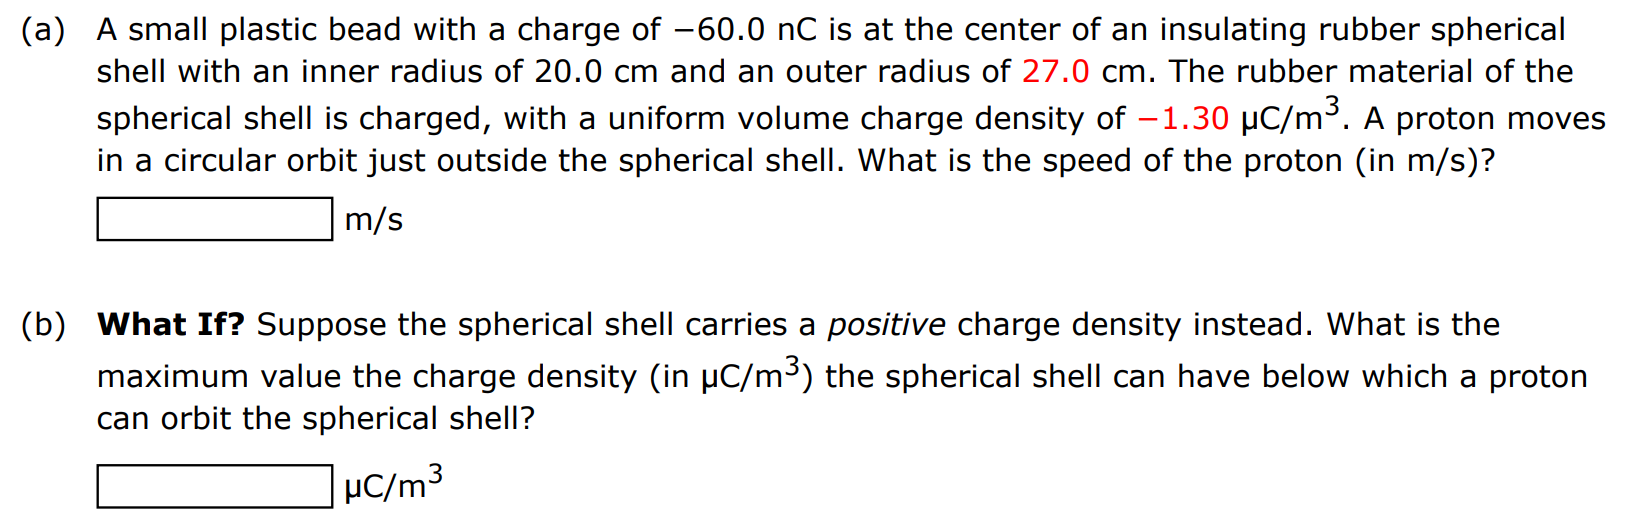 (a) A small plastic bead with a charge of −60.0 nC is at the center of an insulating rubber spherical shell with an inner radius of 20.0 cm and an outer radius of 27.0 cm. The rubber material of the spherical shell is charged, with a uniform volume charge density of −1.30 μC/m3. A proton moves in a circular orbit just outside the spherical shell. What is the speed of the proton (in m/s )? m/s (b) What If? Suppose the spherical shell carries a positive charge density instead. What is the maximum value the charge density (in μC/m3 ) the spherical shell can have below which a proton can orbit the spherical shell? μC/m3 